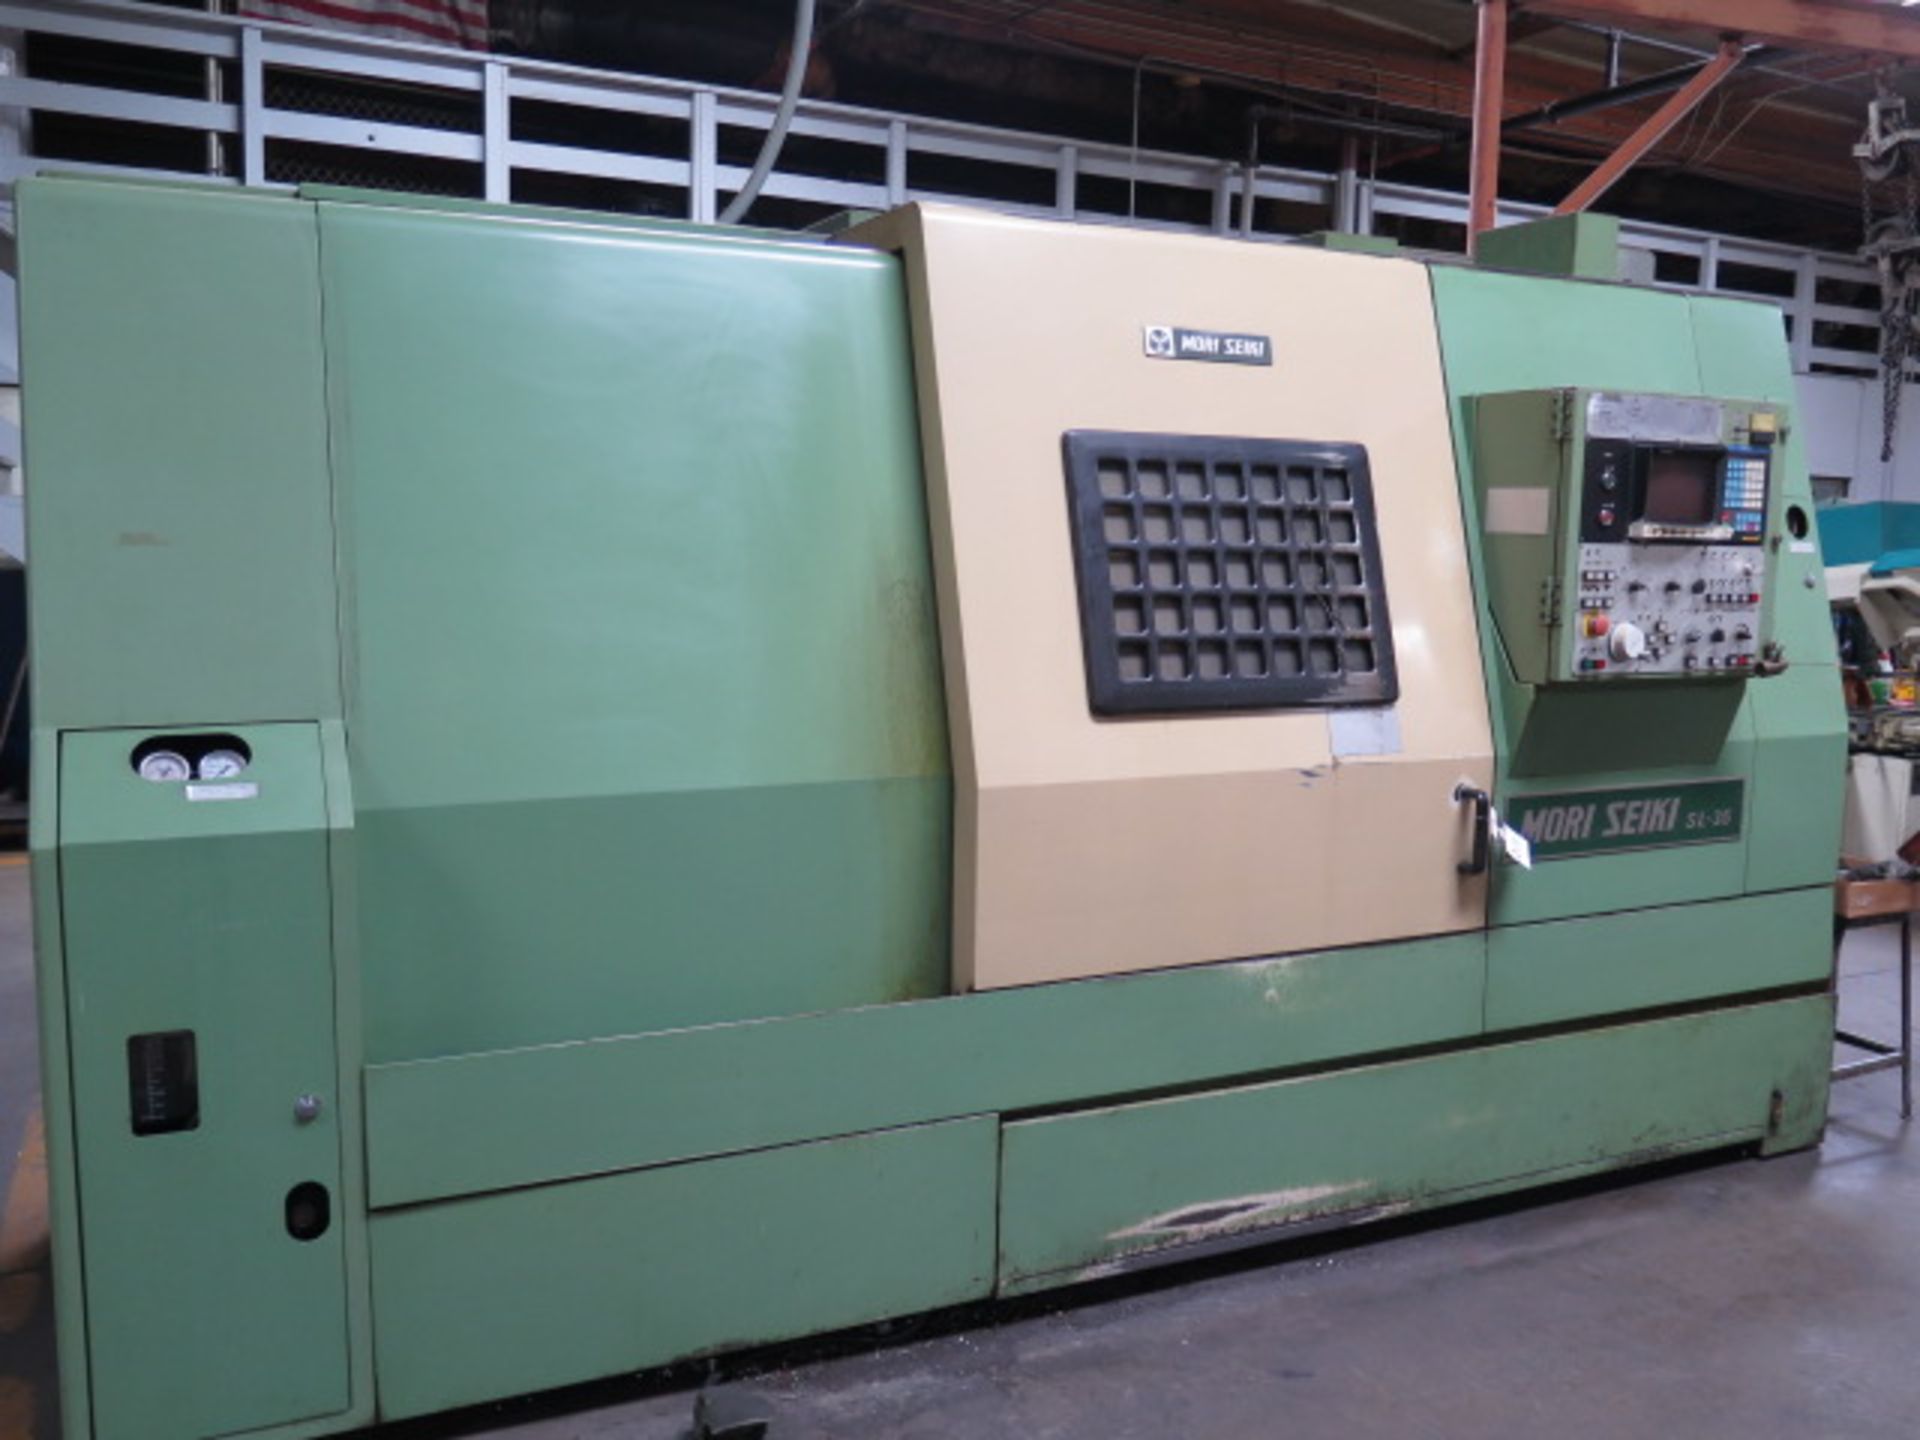 Mori Seiki SL-35A CNC Turning Center s/n 423 w/ Fanuc 10T Controls, 12-Station Turret, SOLD AS IS